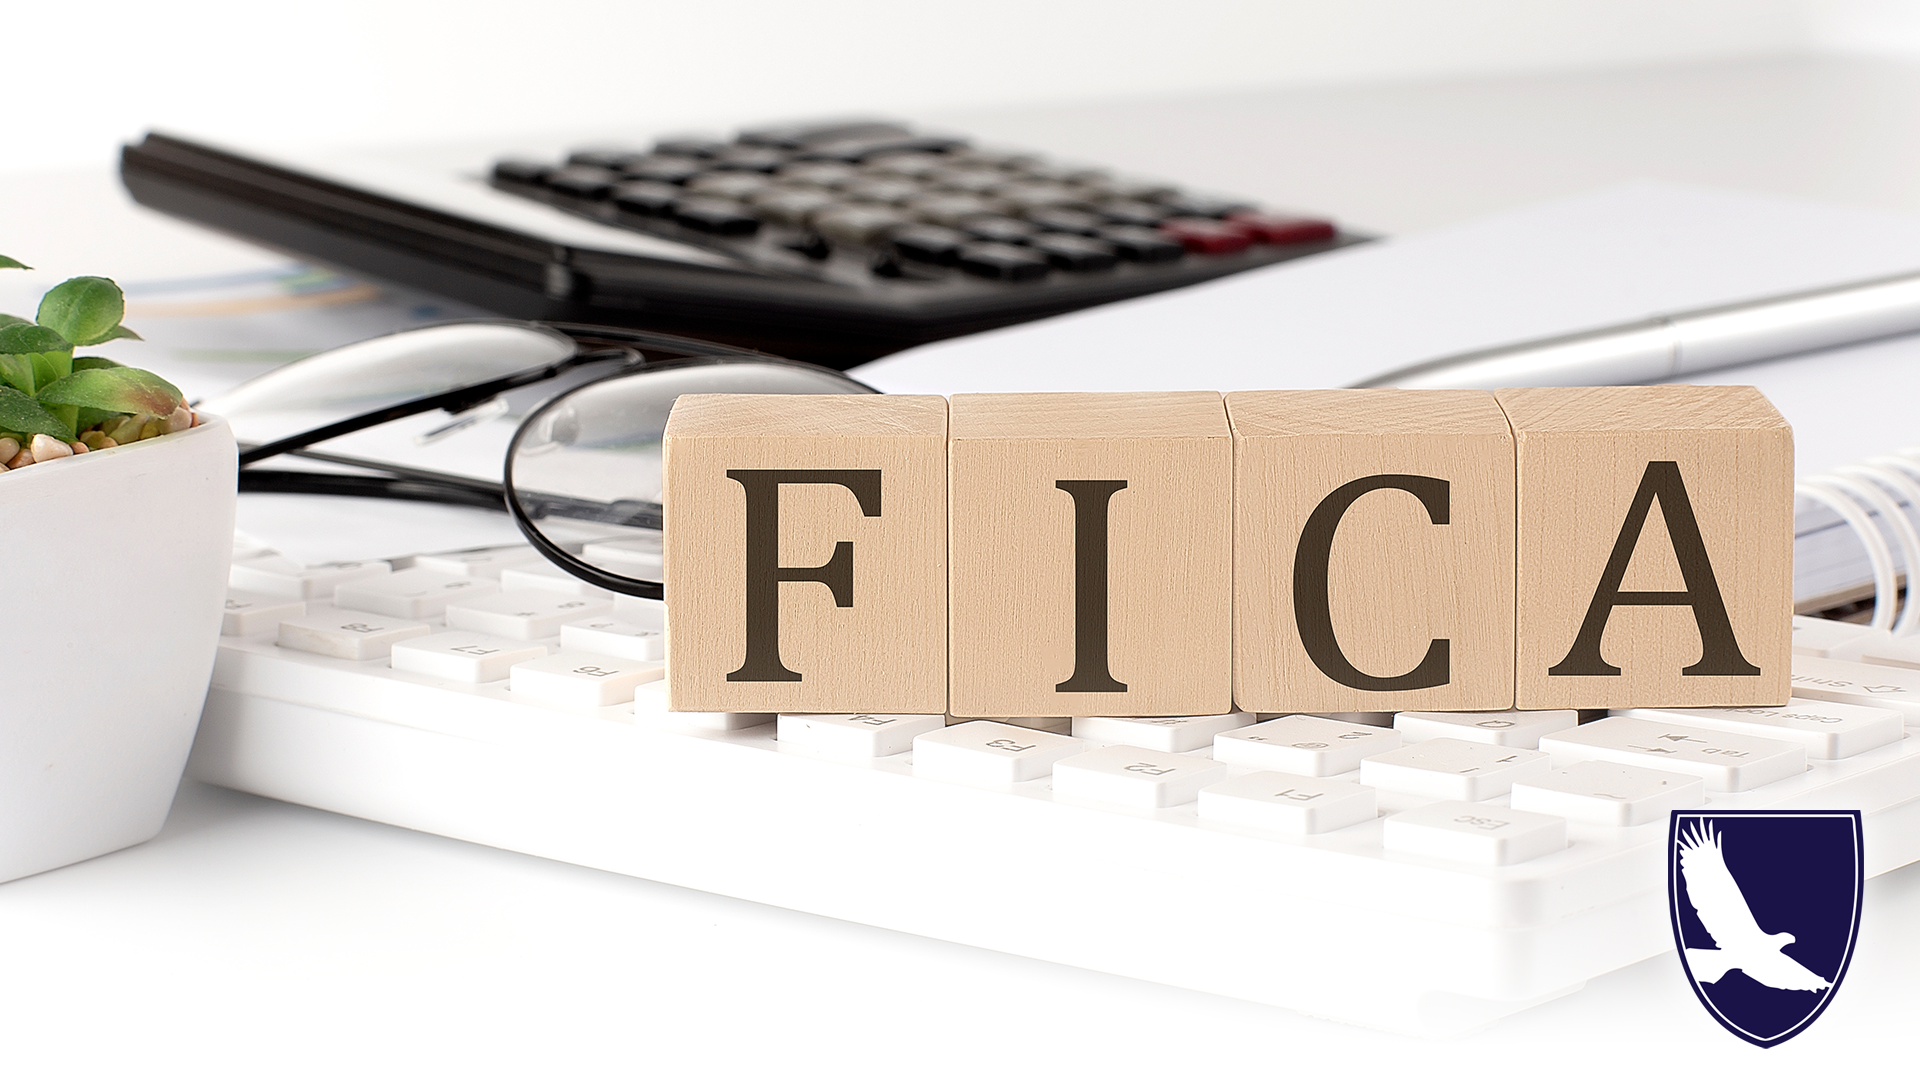 FICA Tax: Understanding Social Security and Medicare Taxes